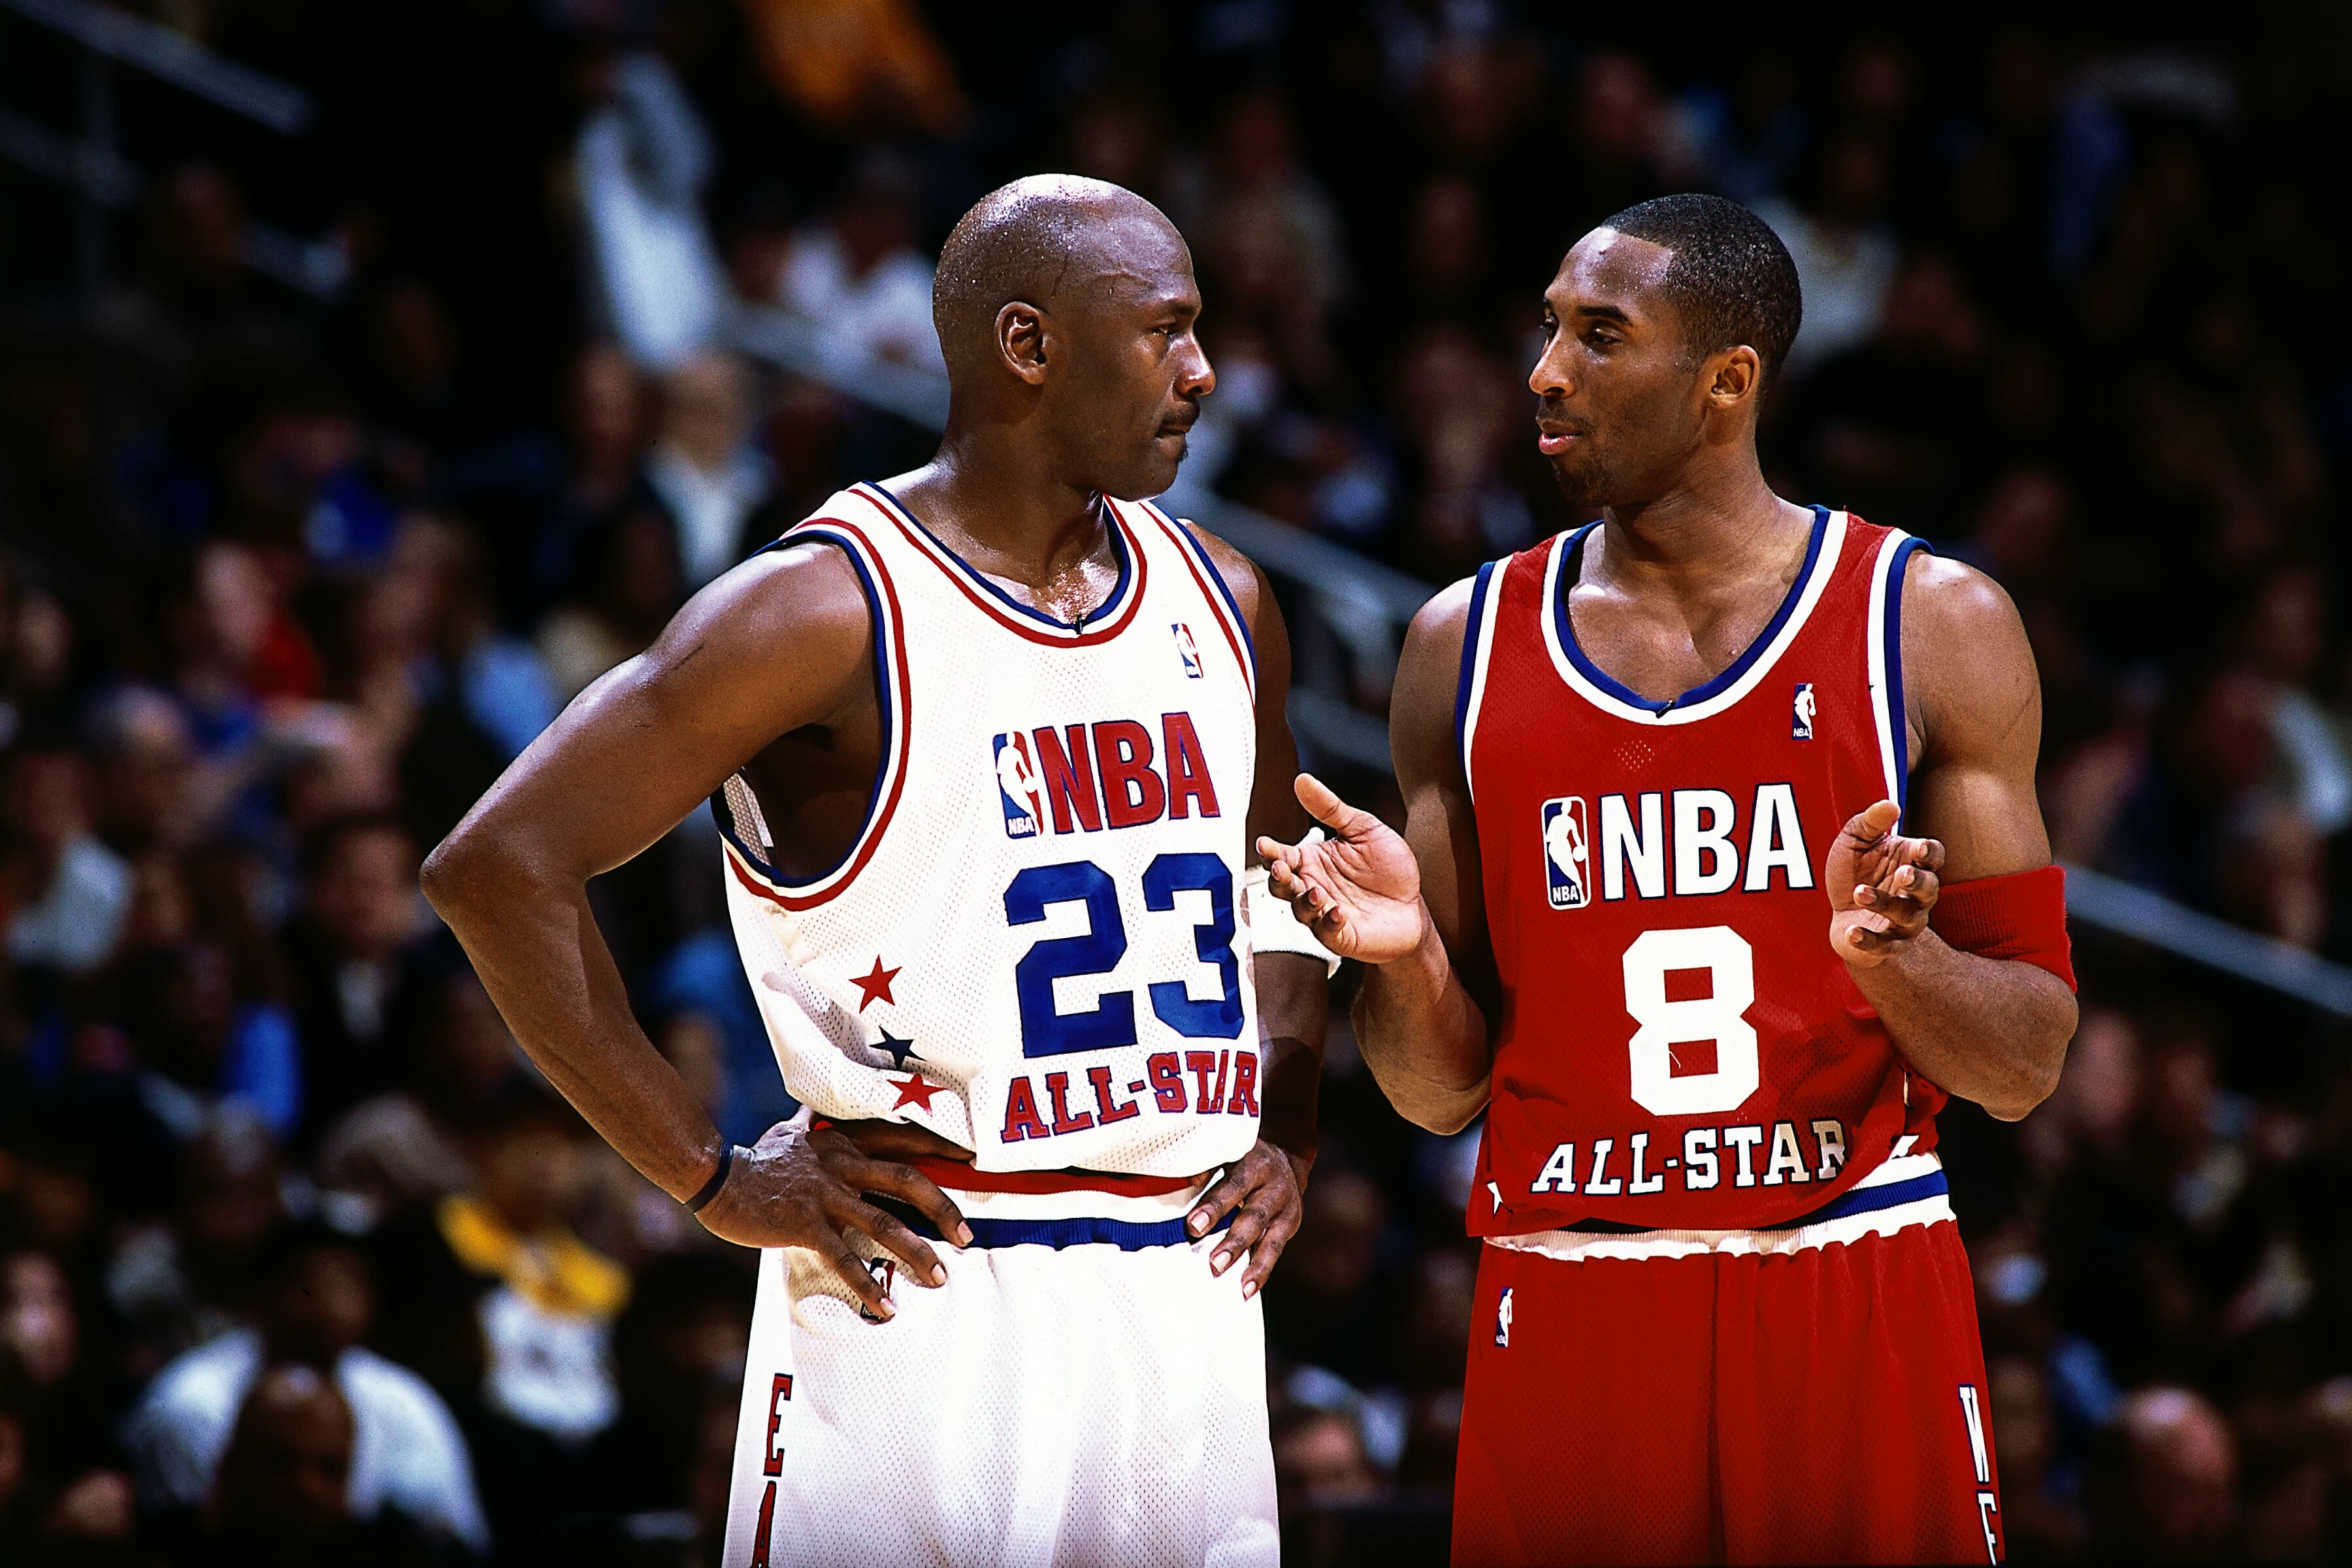 Kobe Bryant tribute: Michael Jordan says he was 'a little brother to me'